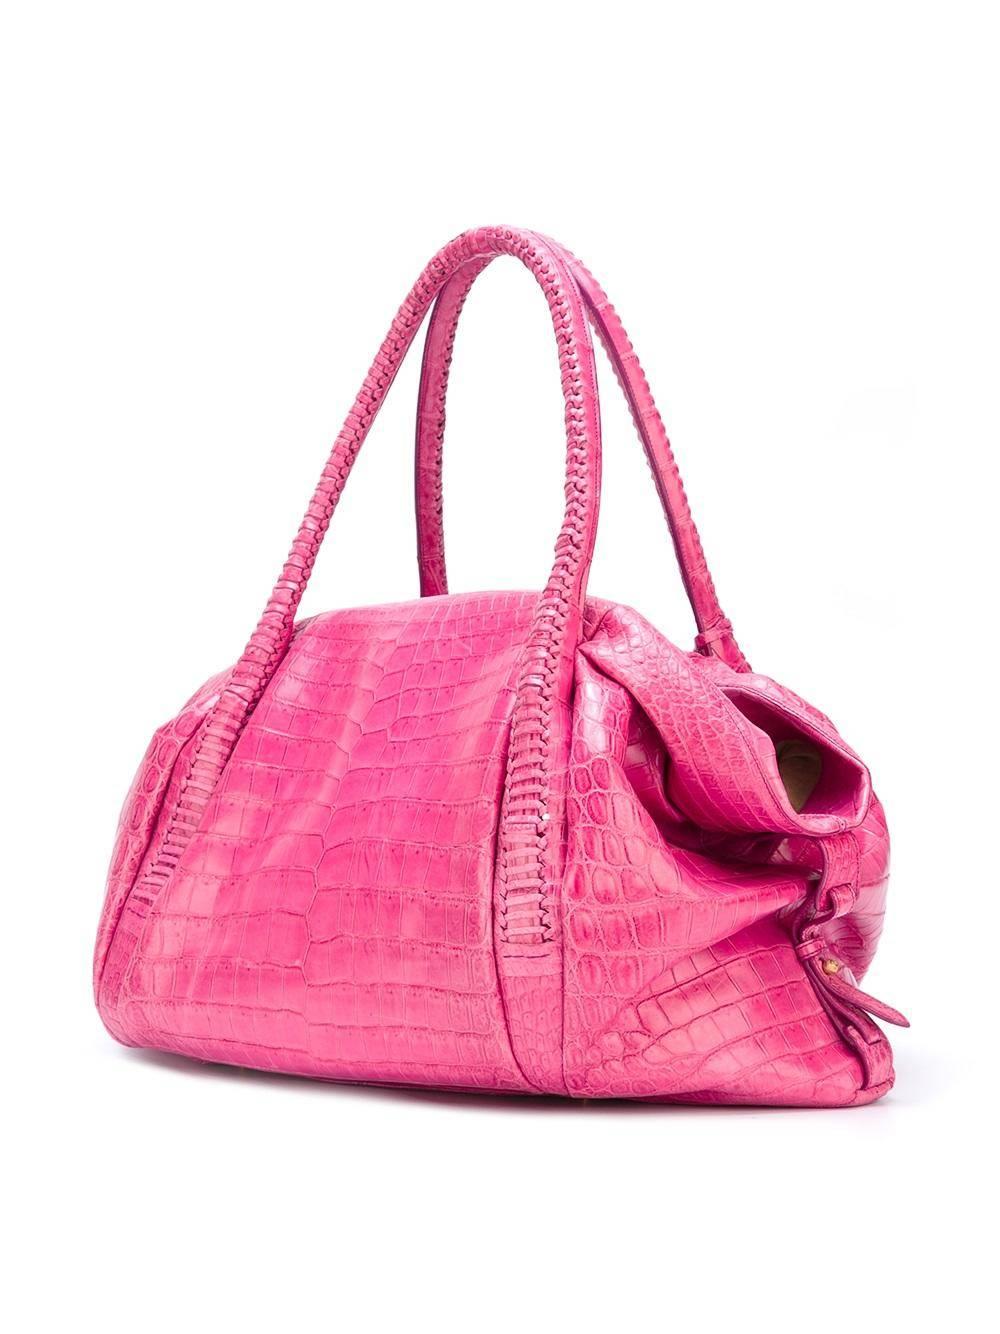 Exceptional and in excellent condition. Ferragamo pink crocodile leather handbag, gilt metal hardware and suede inside. 

Marked : Salvatore Ferragamo Made in Italy

Size : 50 x 30 x 20 cm

Excellent condition. International Shipping. 